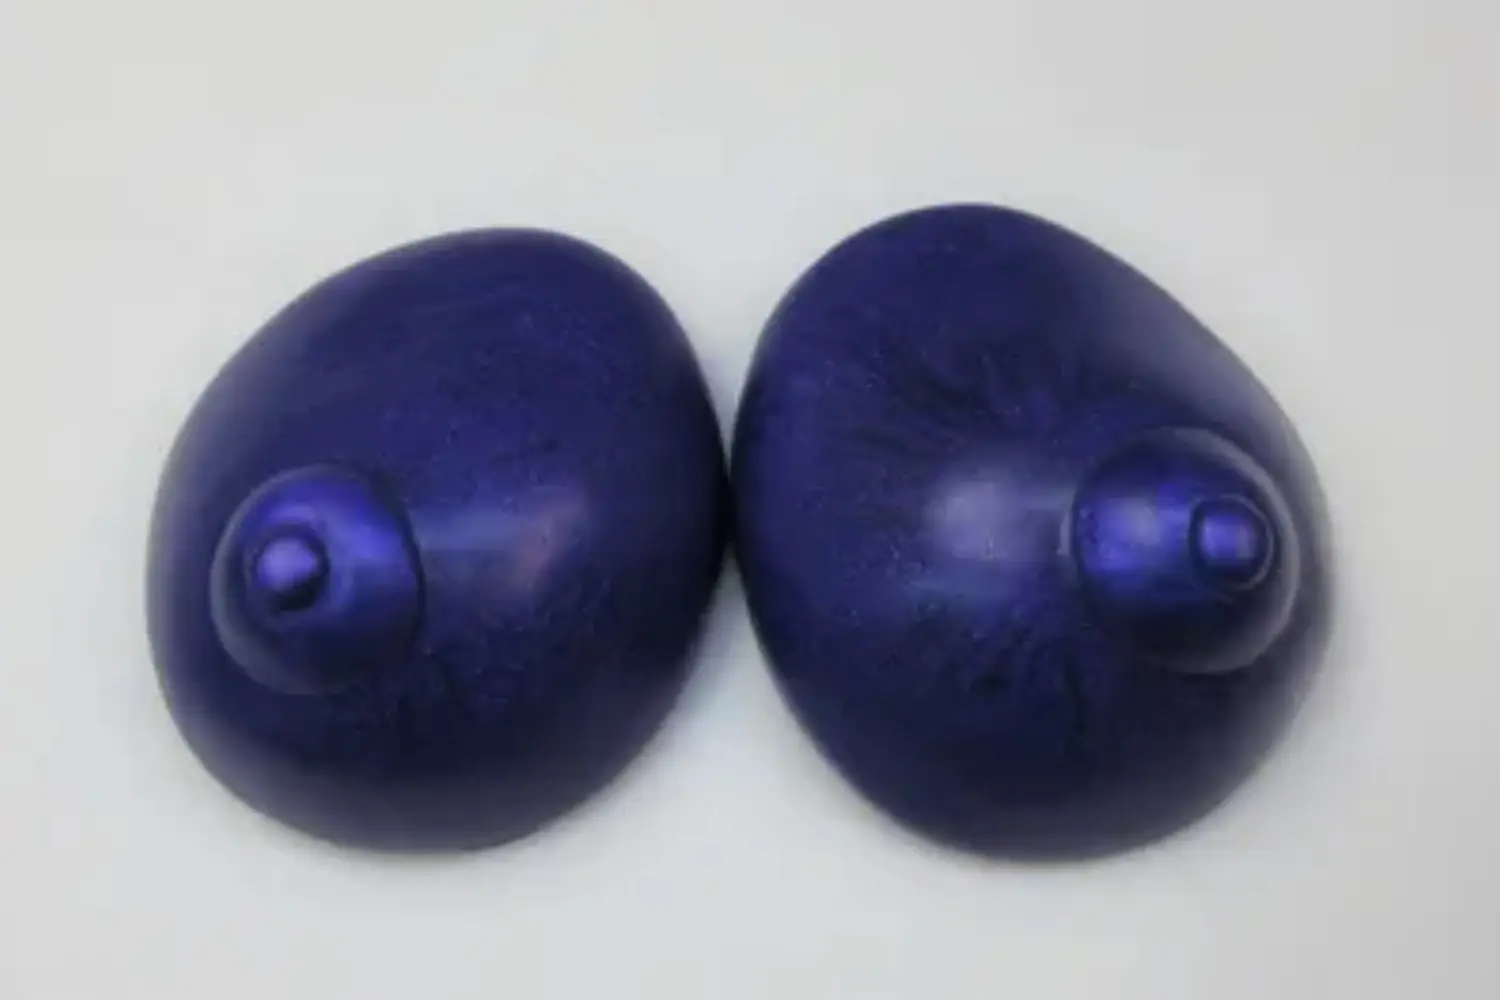 Two blue eggs are sitting on a table.